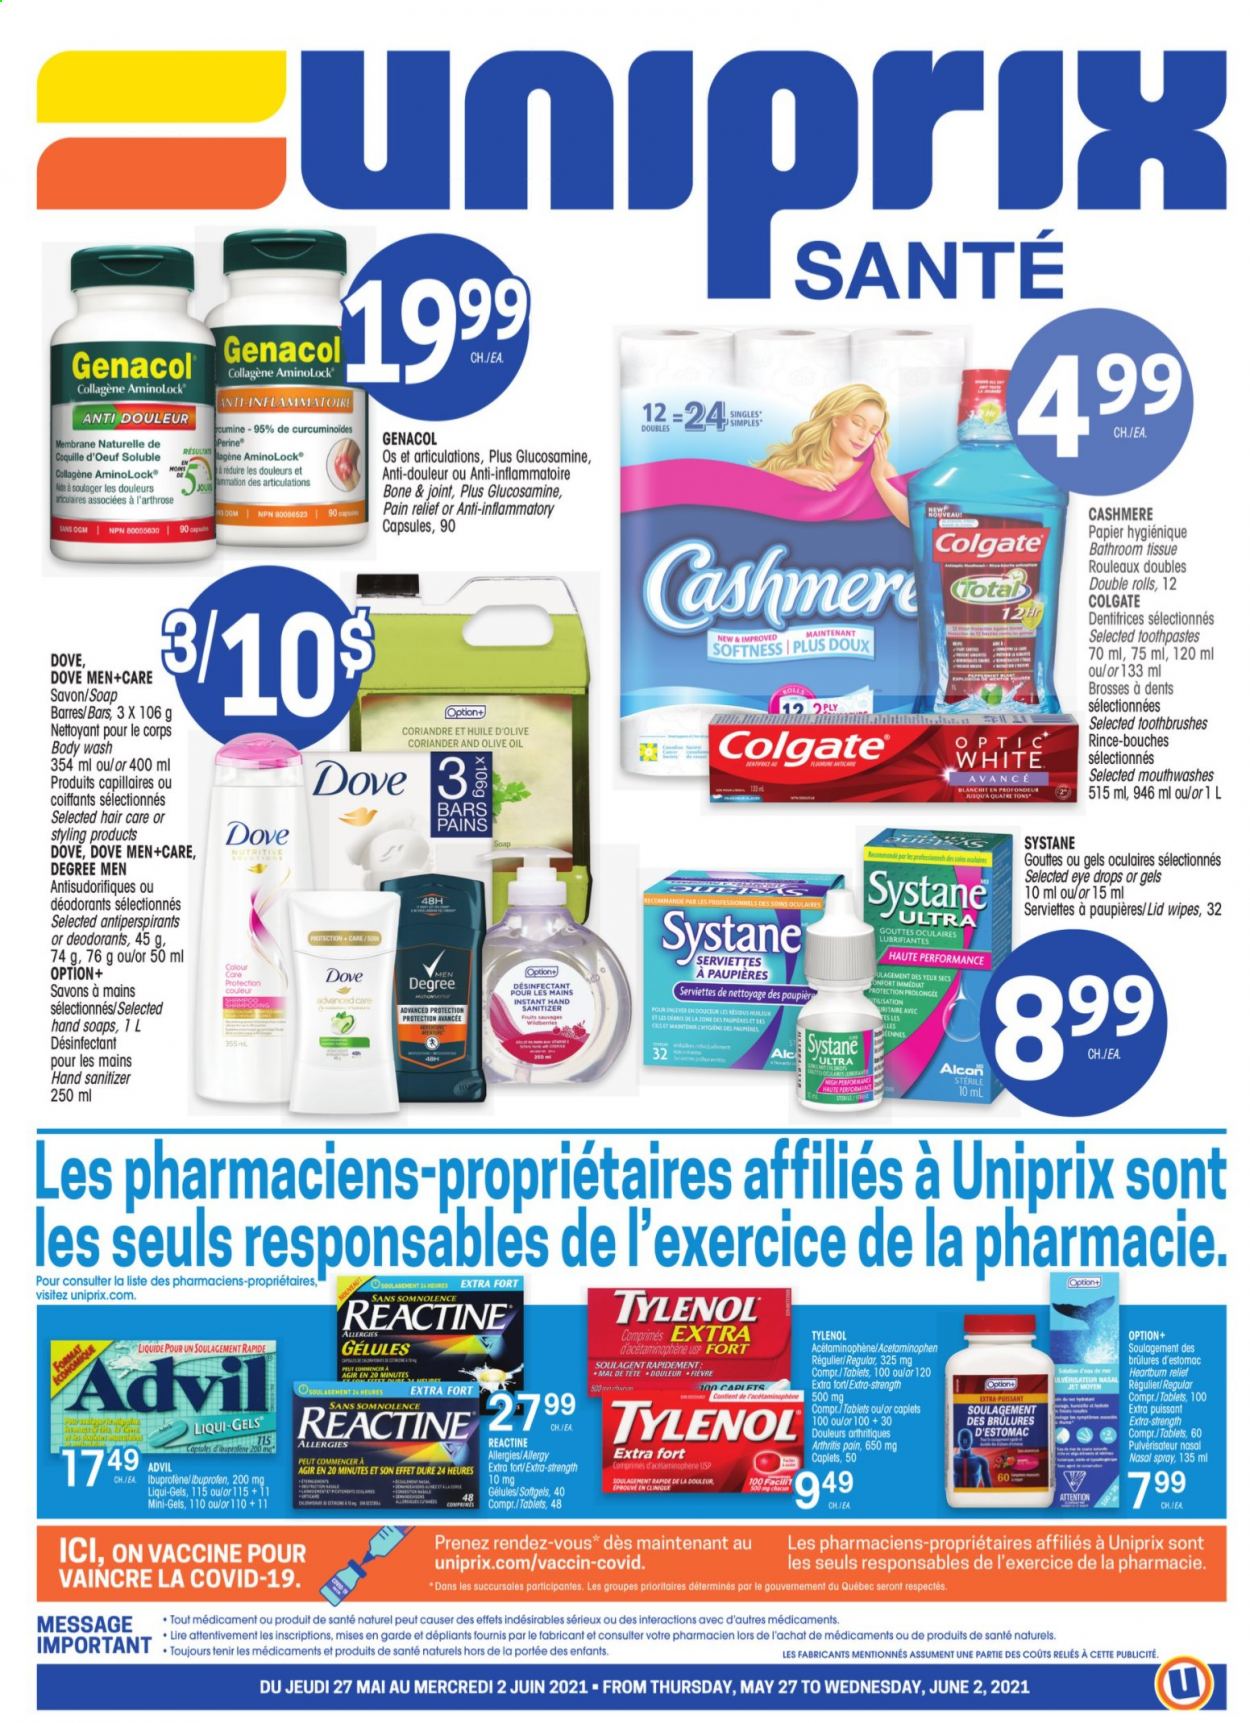 thumbnail - Uniprix Santé Flyer - May 27, 2021 - June 02, 2021 - Sales products - coriander, olive oil, oil, wipes, bath tissue, Jet, body wash, soap, hand sanitizer, pain relief, Tylenol, Ibuprofen, eye drops, Advil Rapid, nasal spray, Systane, deodorant. Page 1.